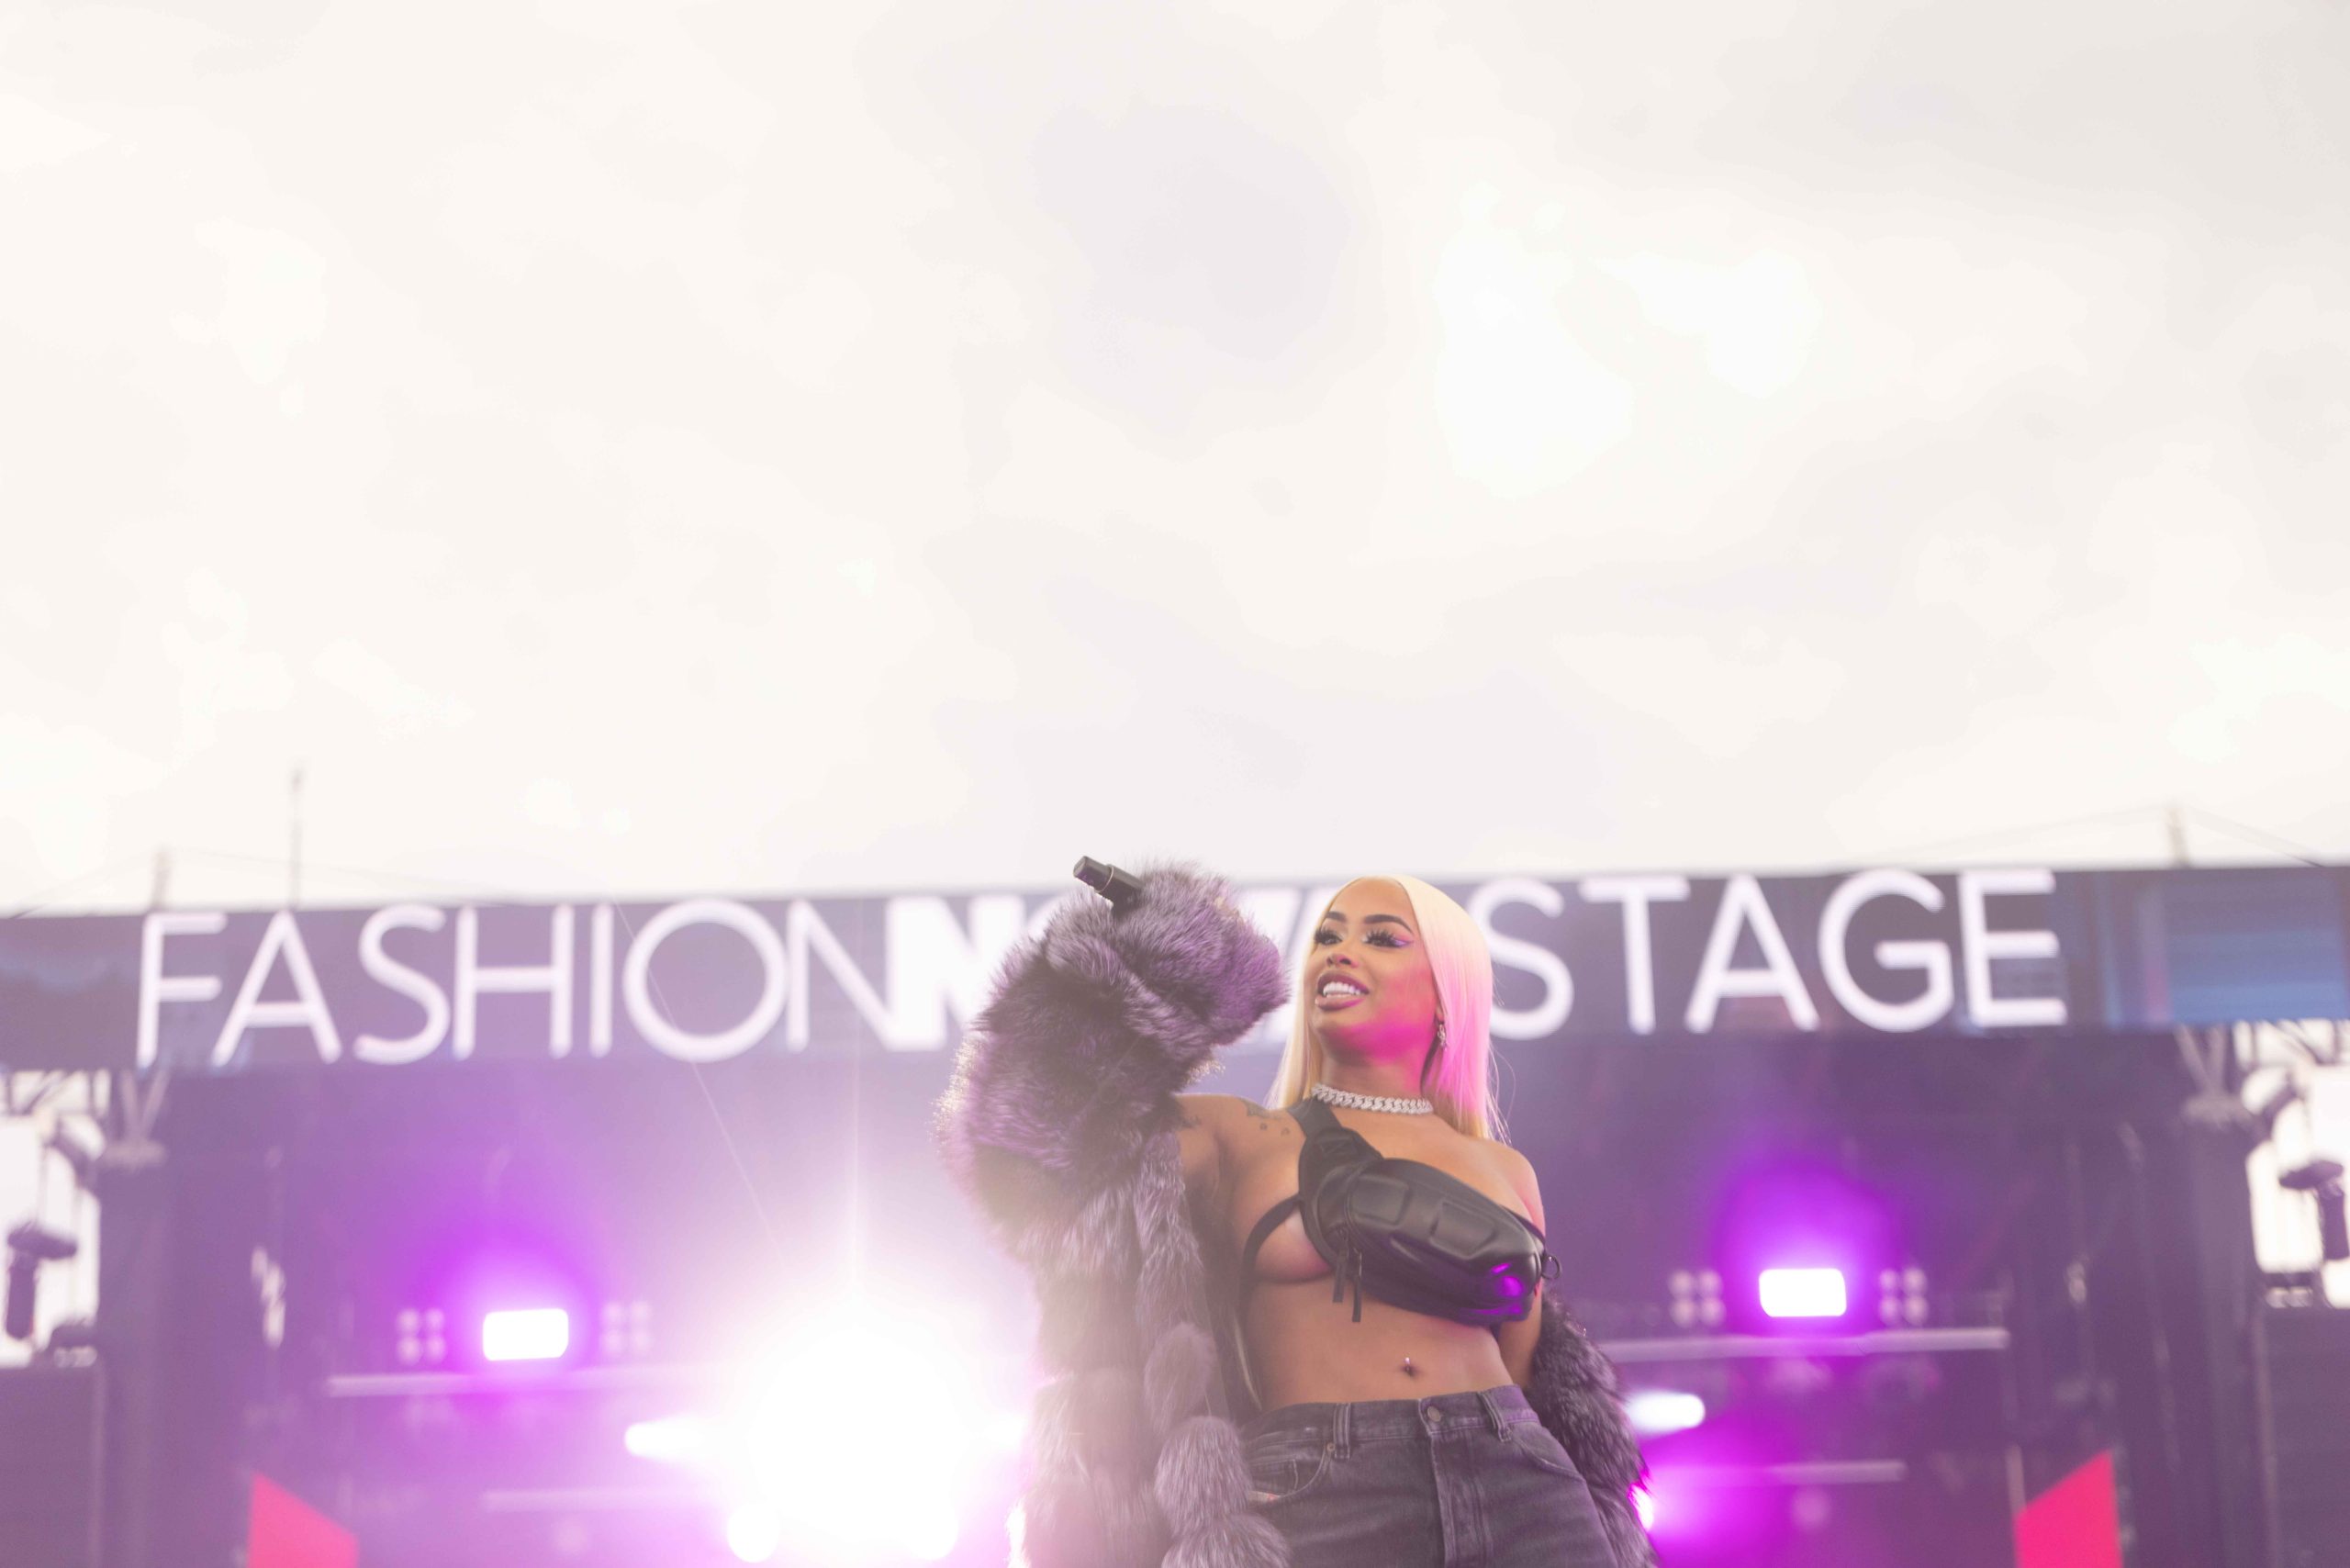 Dream Doll performs at the Fashion Nova Stage at Rolling Loud New York 2022 at Citi Field in Queens, New York on Sunday, September 25. PHOTO CREDIT: Meraki House for Fashion Nova